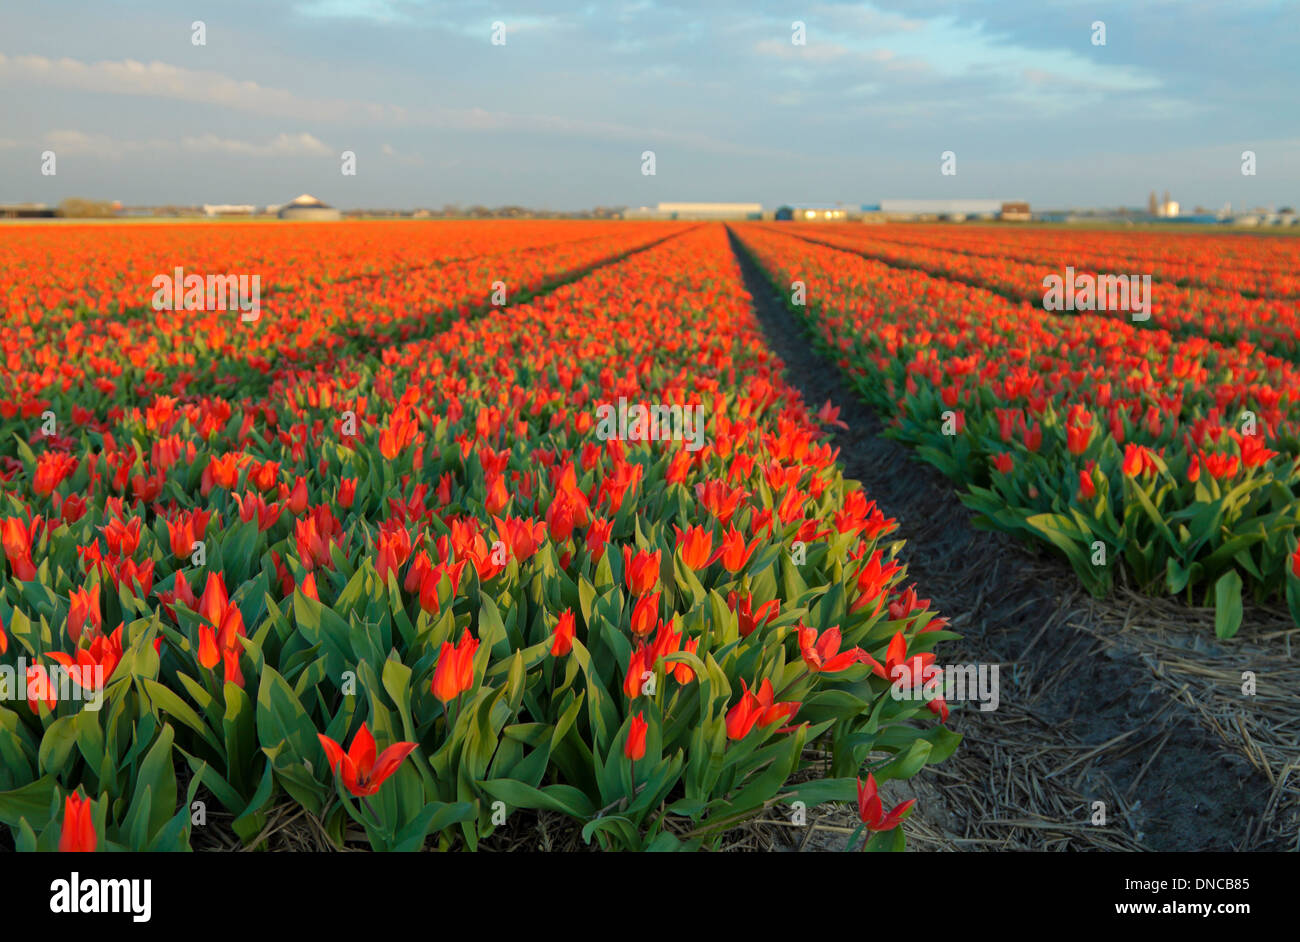 Spring time in The Netherlands: Colorful fields of red tulips at dusk, Noordwijk, South Holland. Stock Photo